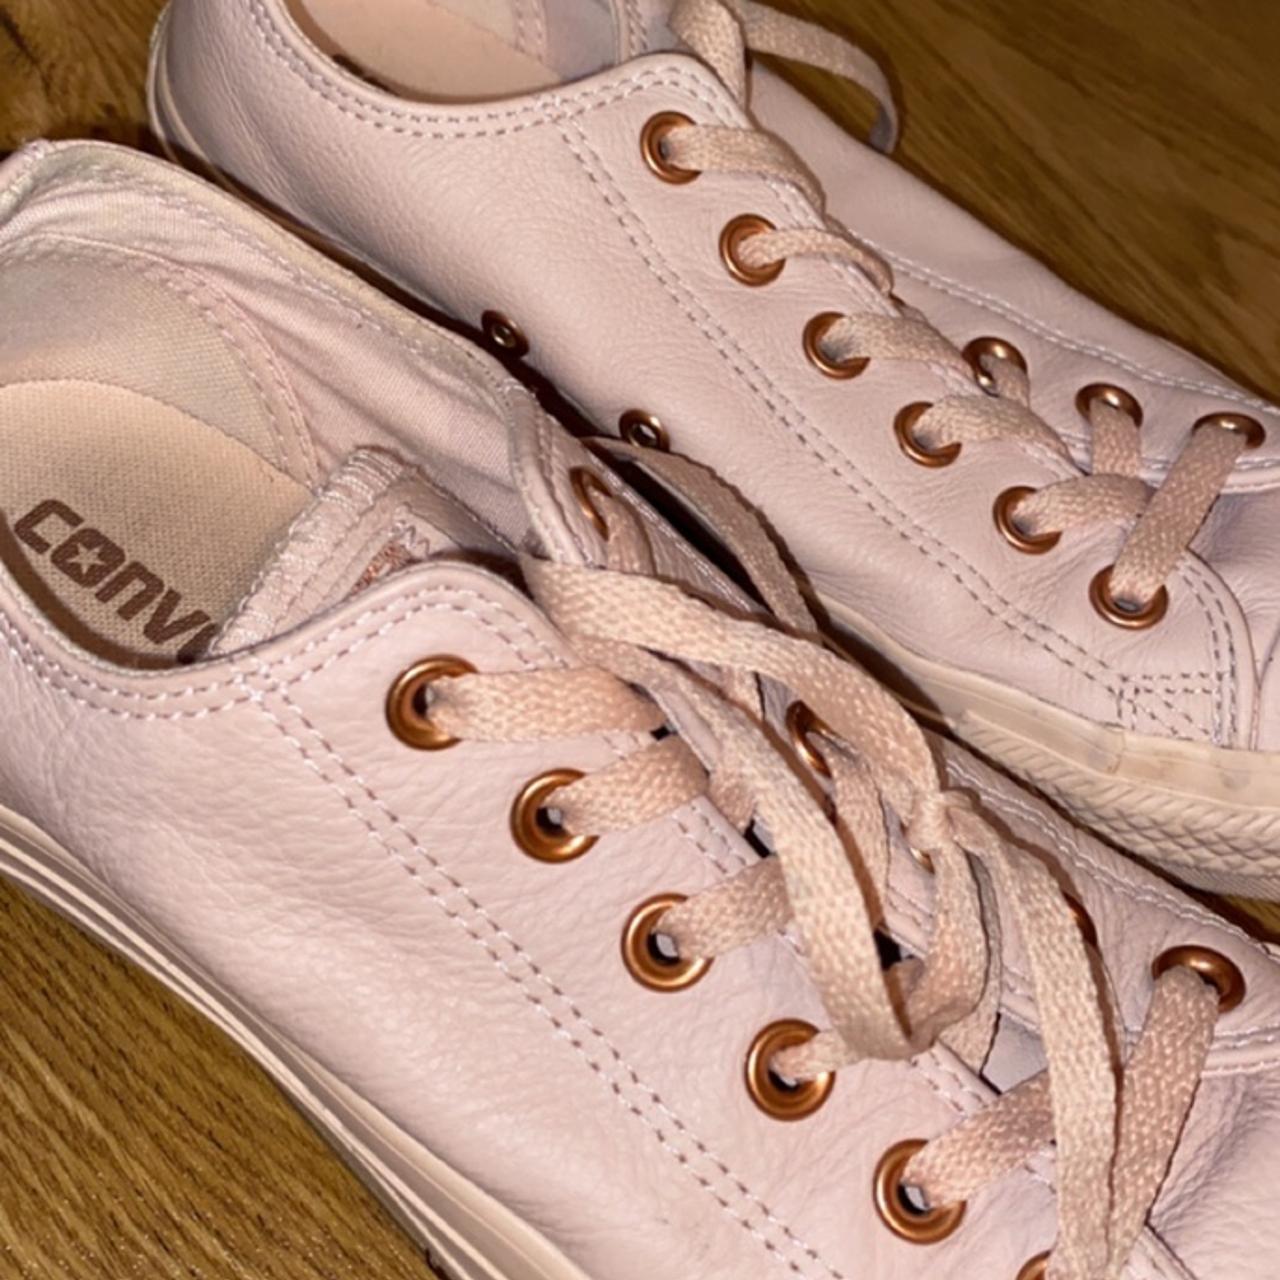 Baby pink / nude converse with rose gold -